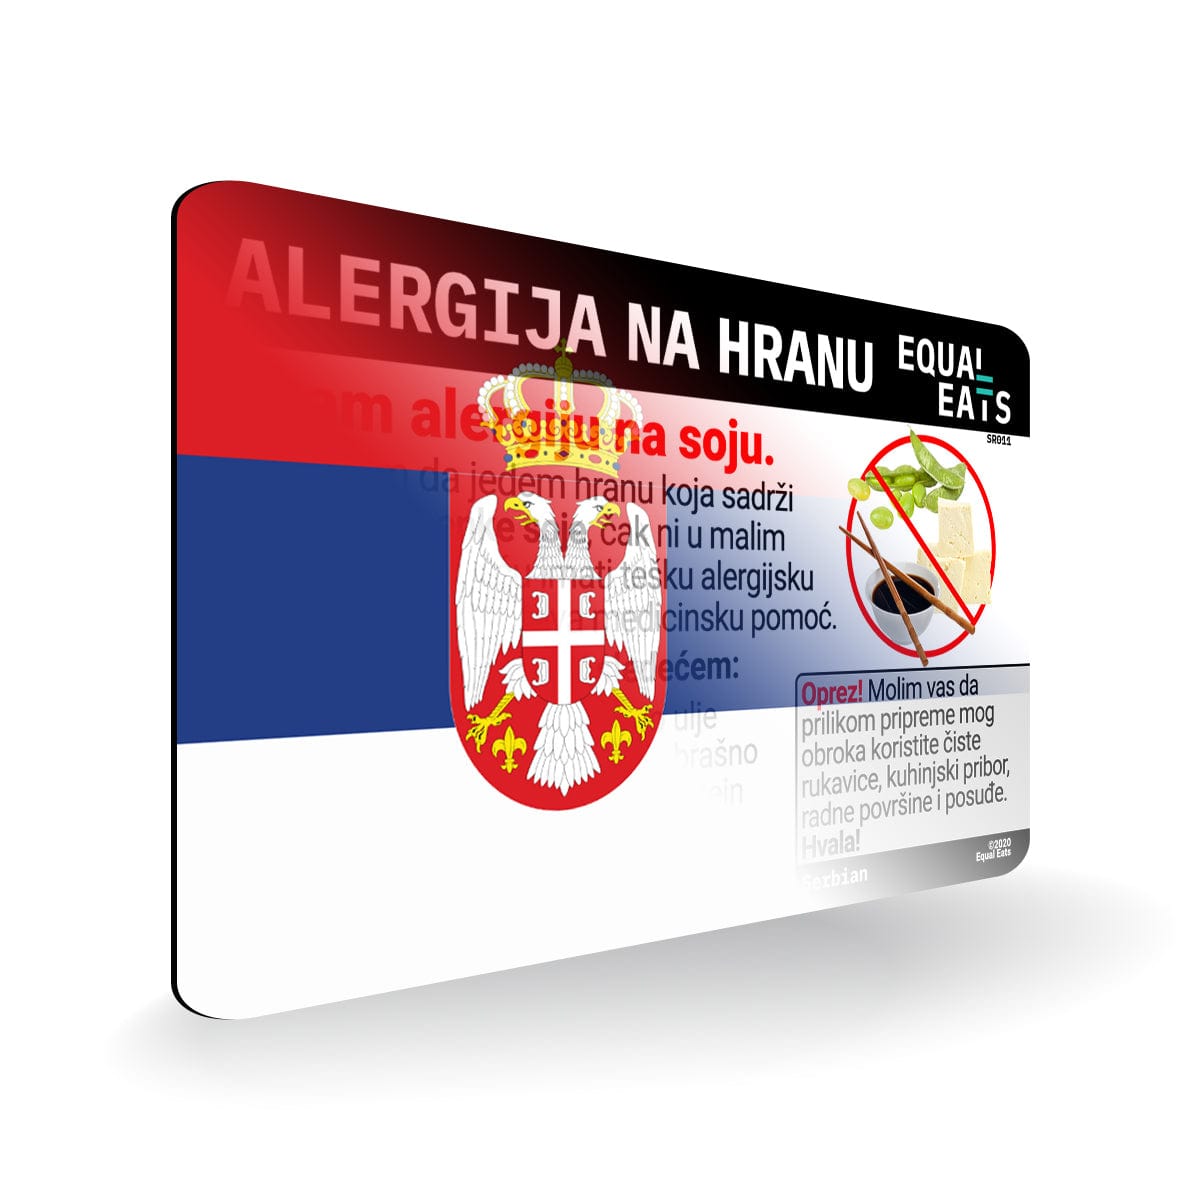 Soy Allergy in Serbian. Soy Allergy Card for Serbia